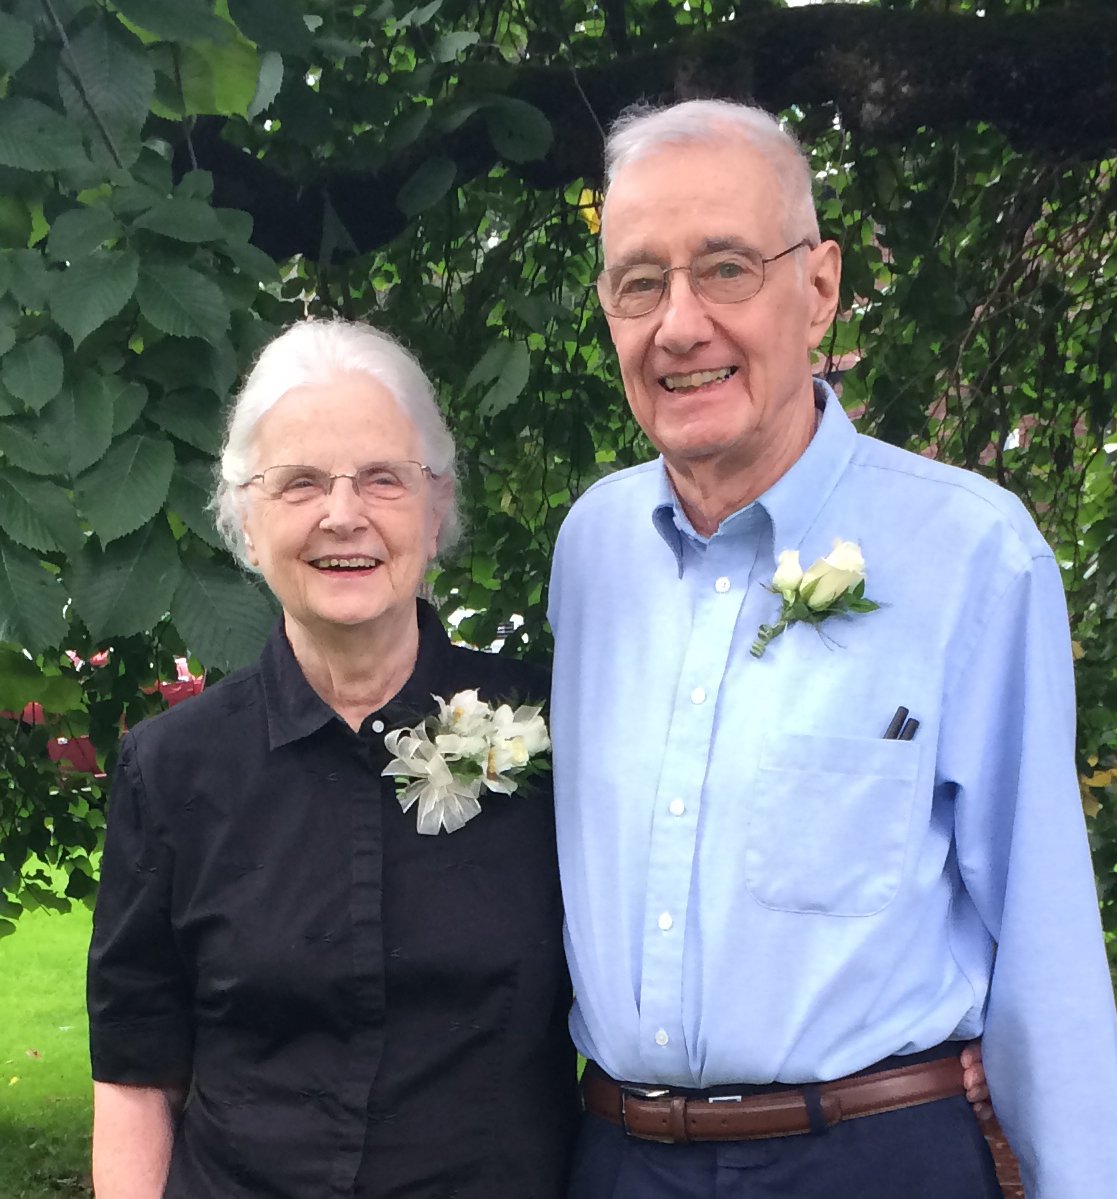 Philip Throop Church (right) and his wife Pat on their 60th wedding anniversary in 2014.